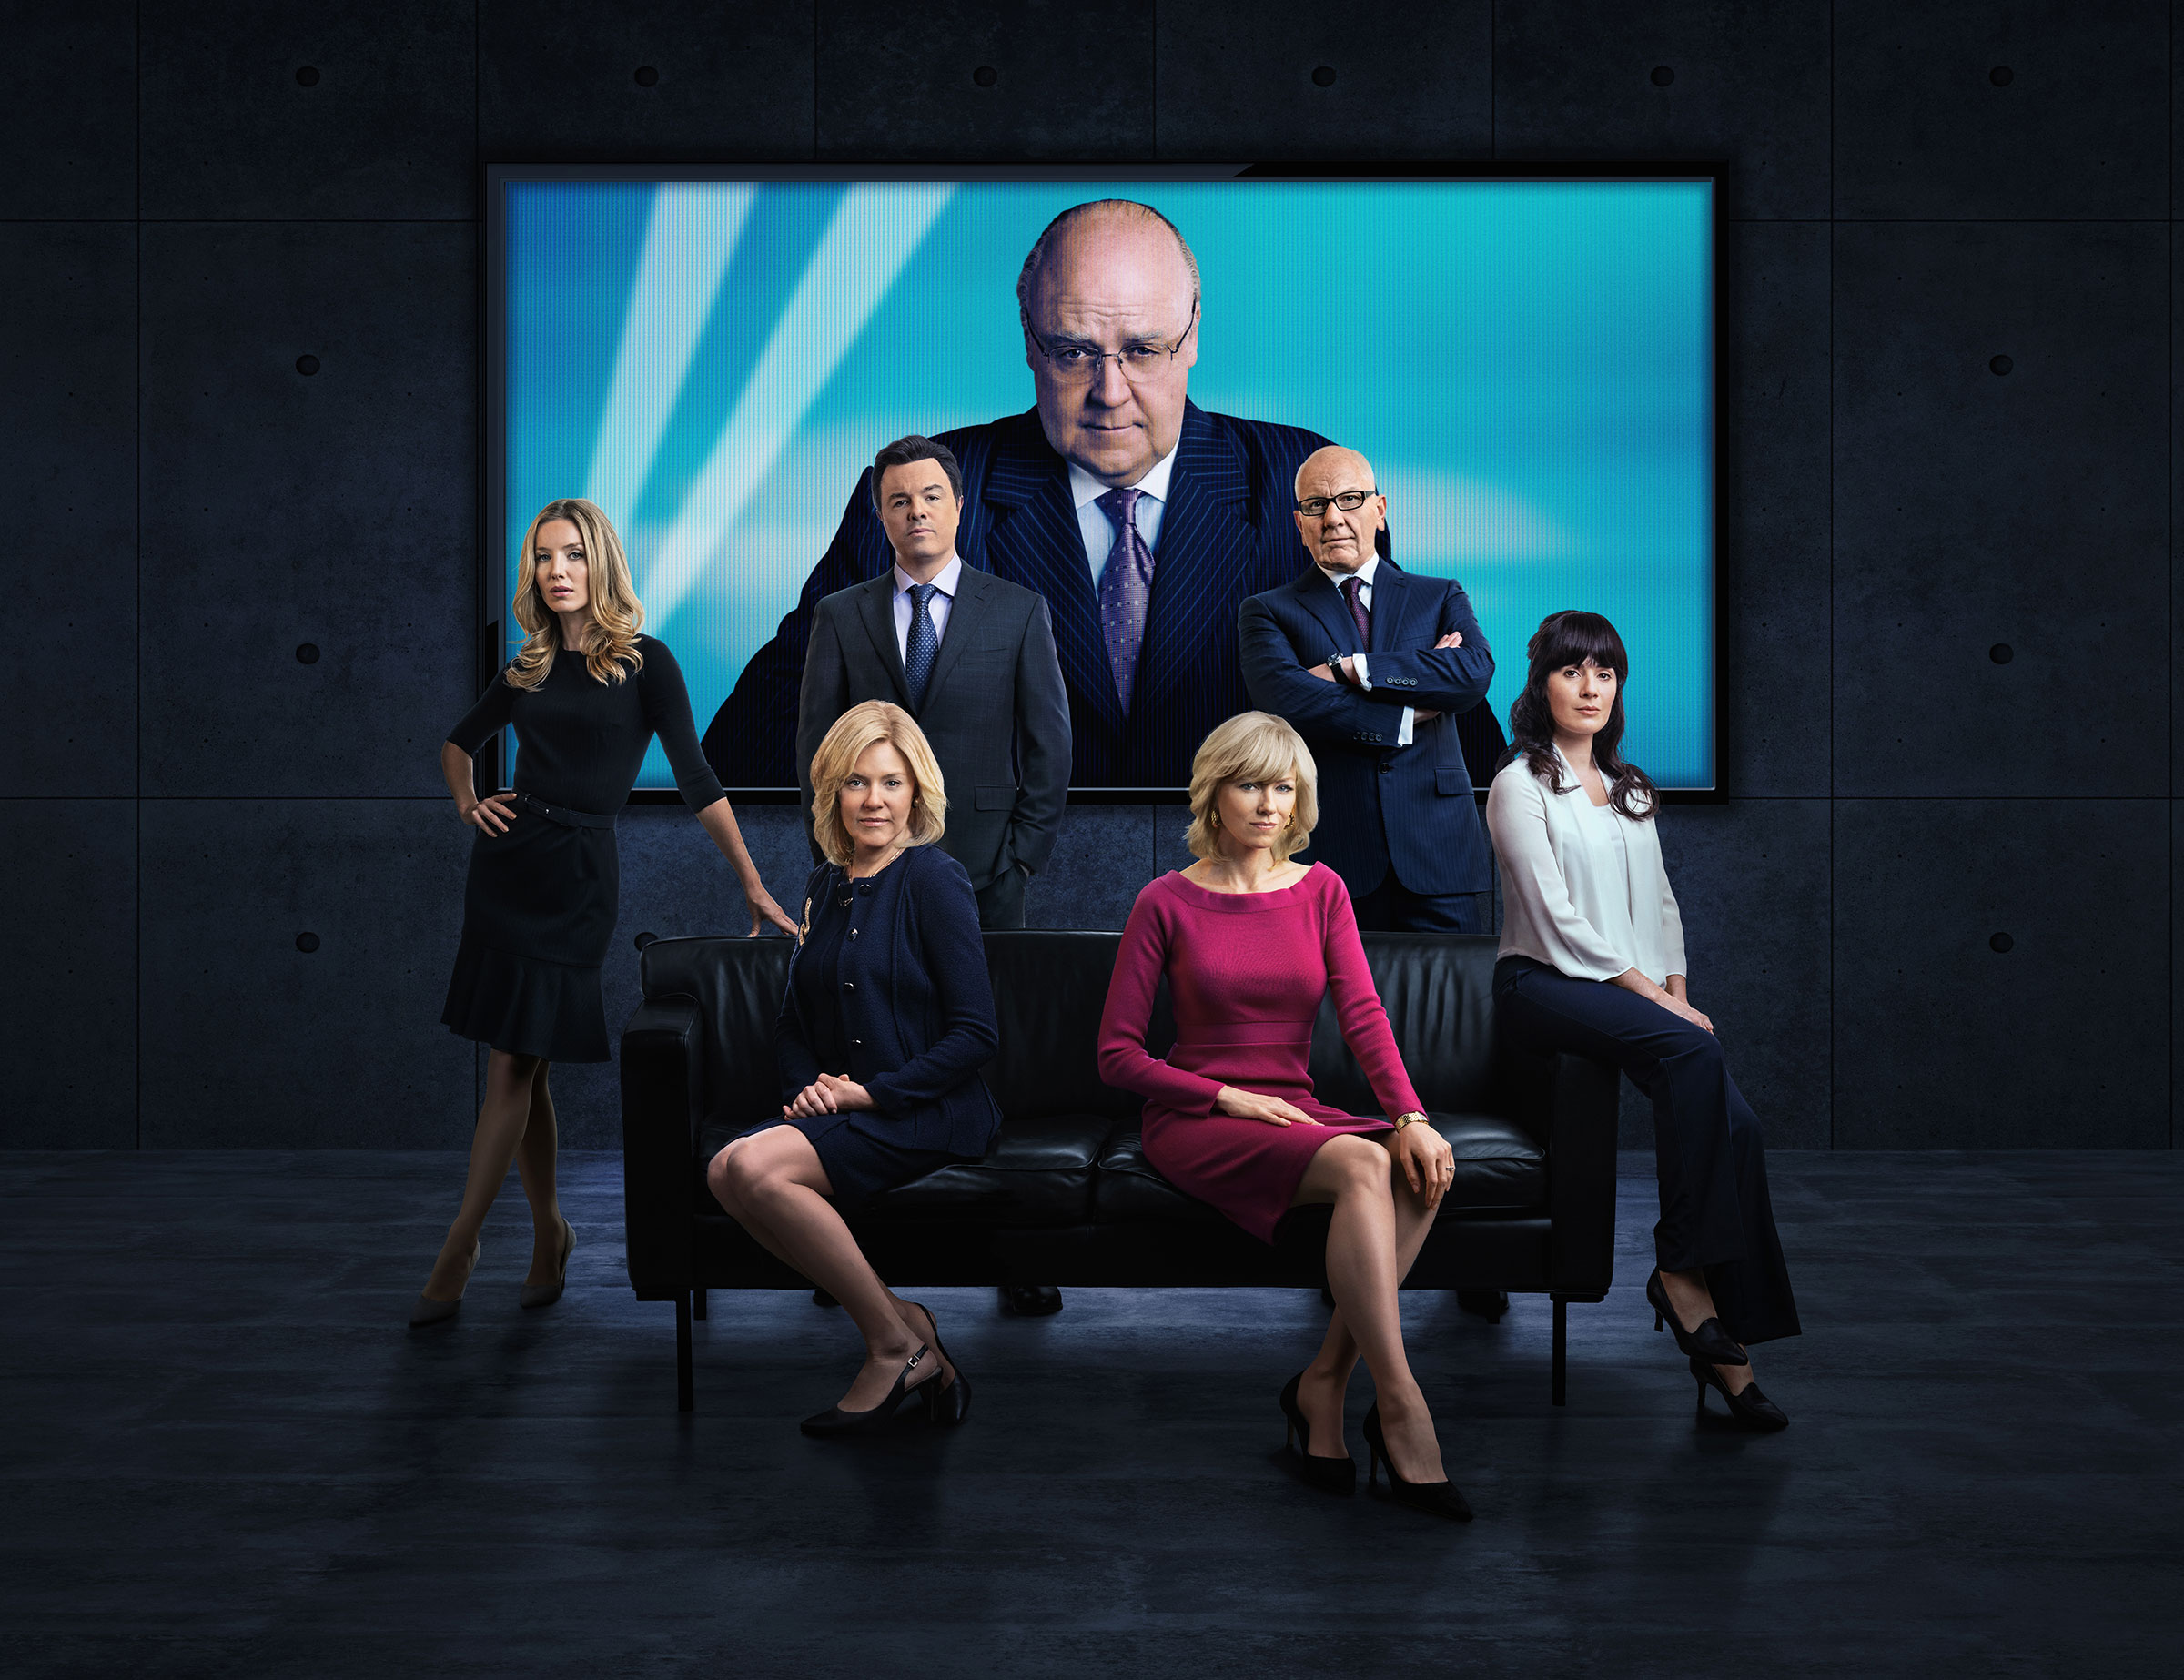 Clockwise from left: Annabelle Wallis as Laurie Luhn, Seth MacFarlane as Brian Lewis, Sienna Miller as Elizabeth Ailes, Russell Crowe as Roger Ailes, Naomi Watts as Gretchen Carlson, Simon McBurney as Rupert Murdoch and Aleksa Palladino as Judy Laterza in The Loudest Voice. (Jim Fiscus—Showtime)